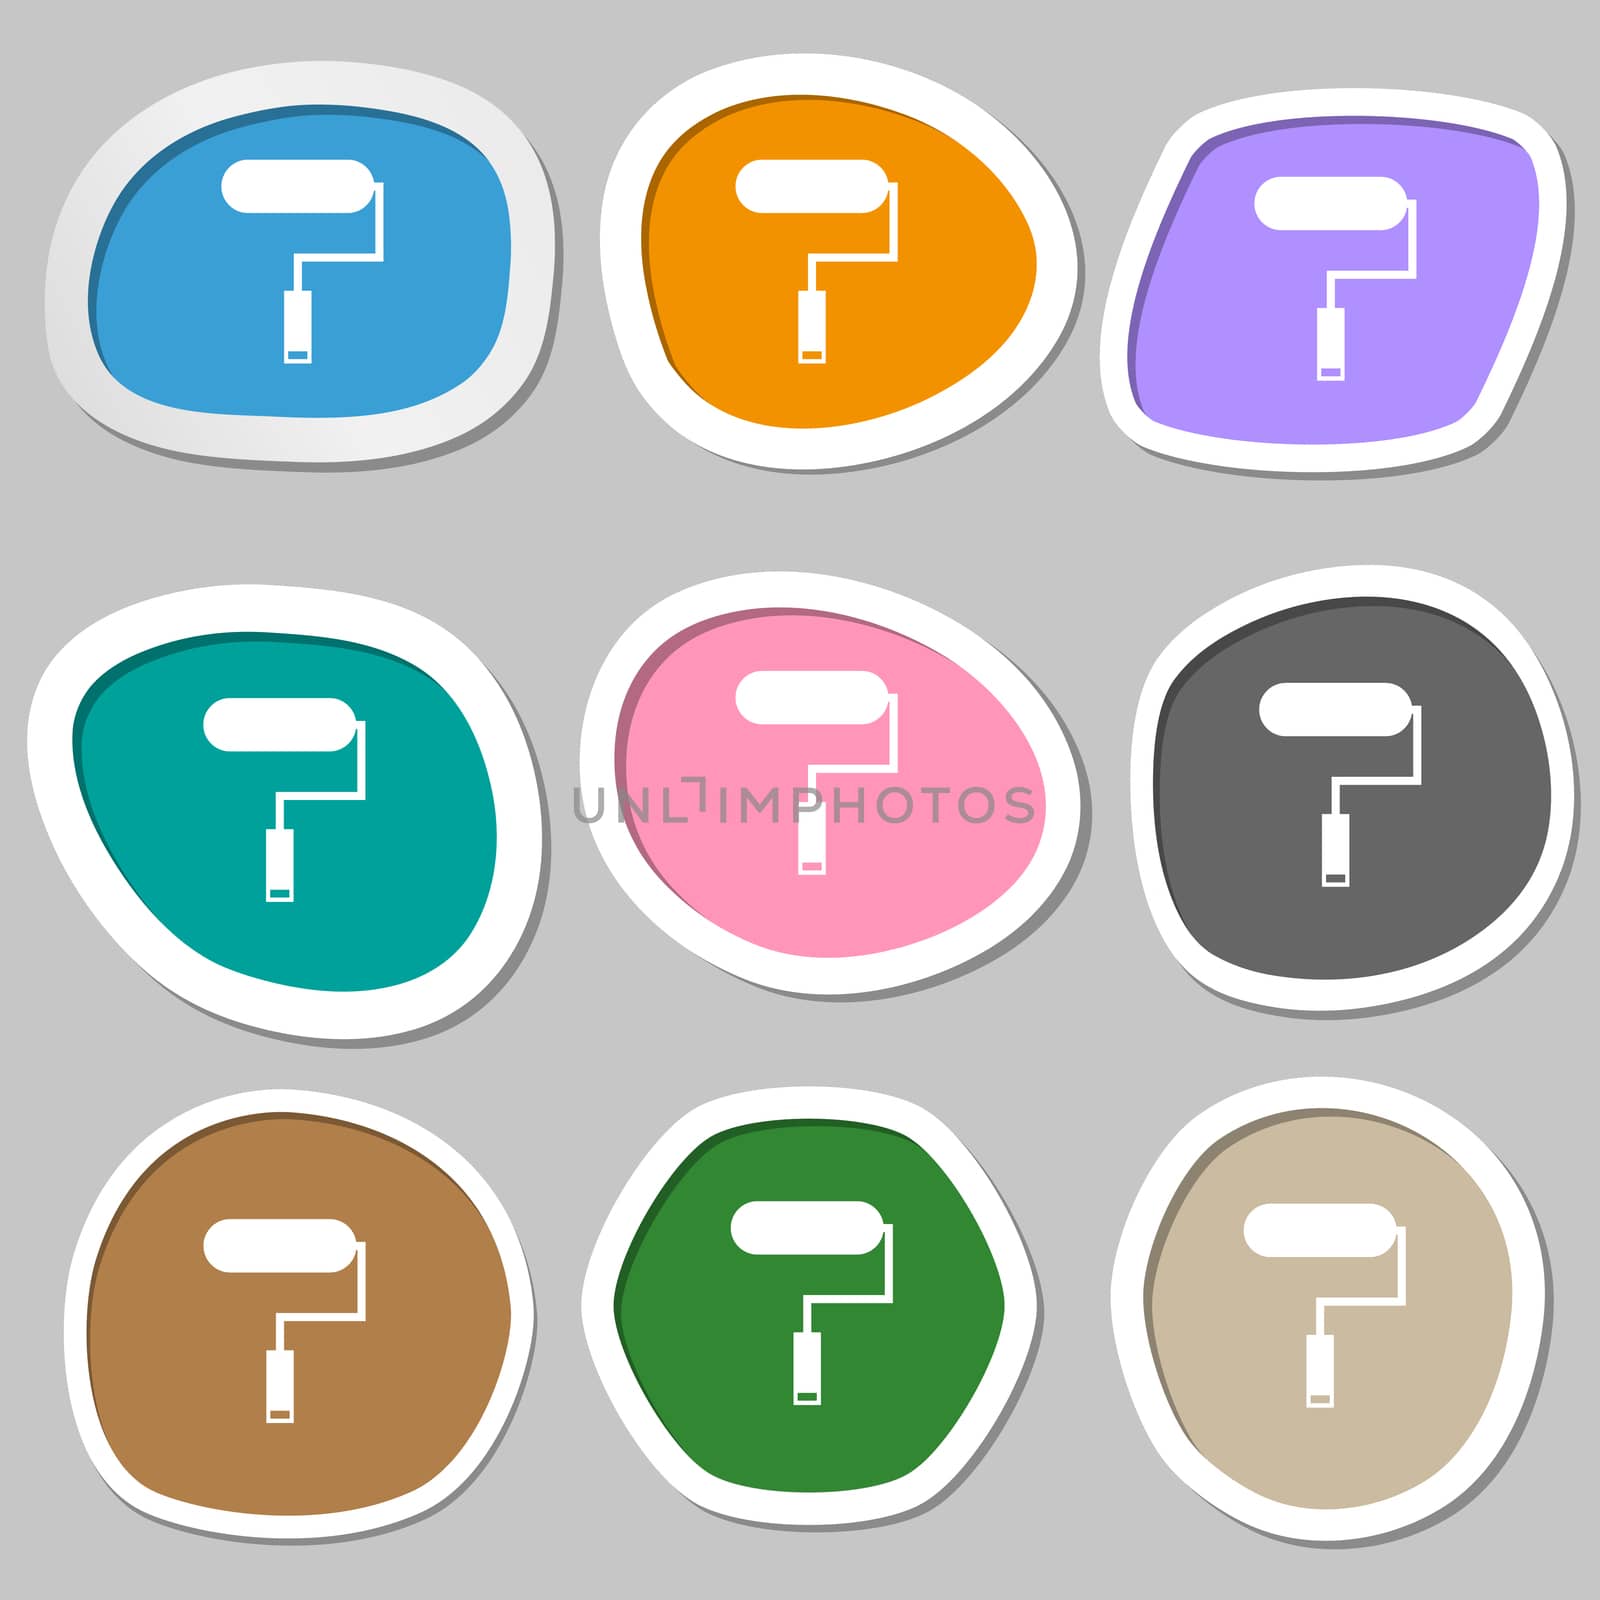 Paint roller sign icon. Painting tool symbol. Multicolored paper stickers. illustration